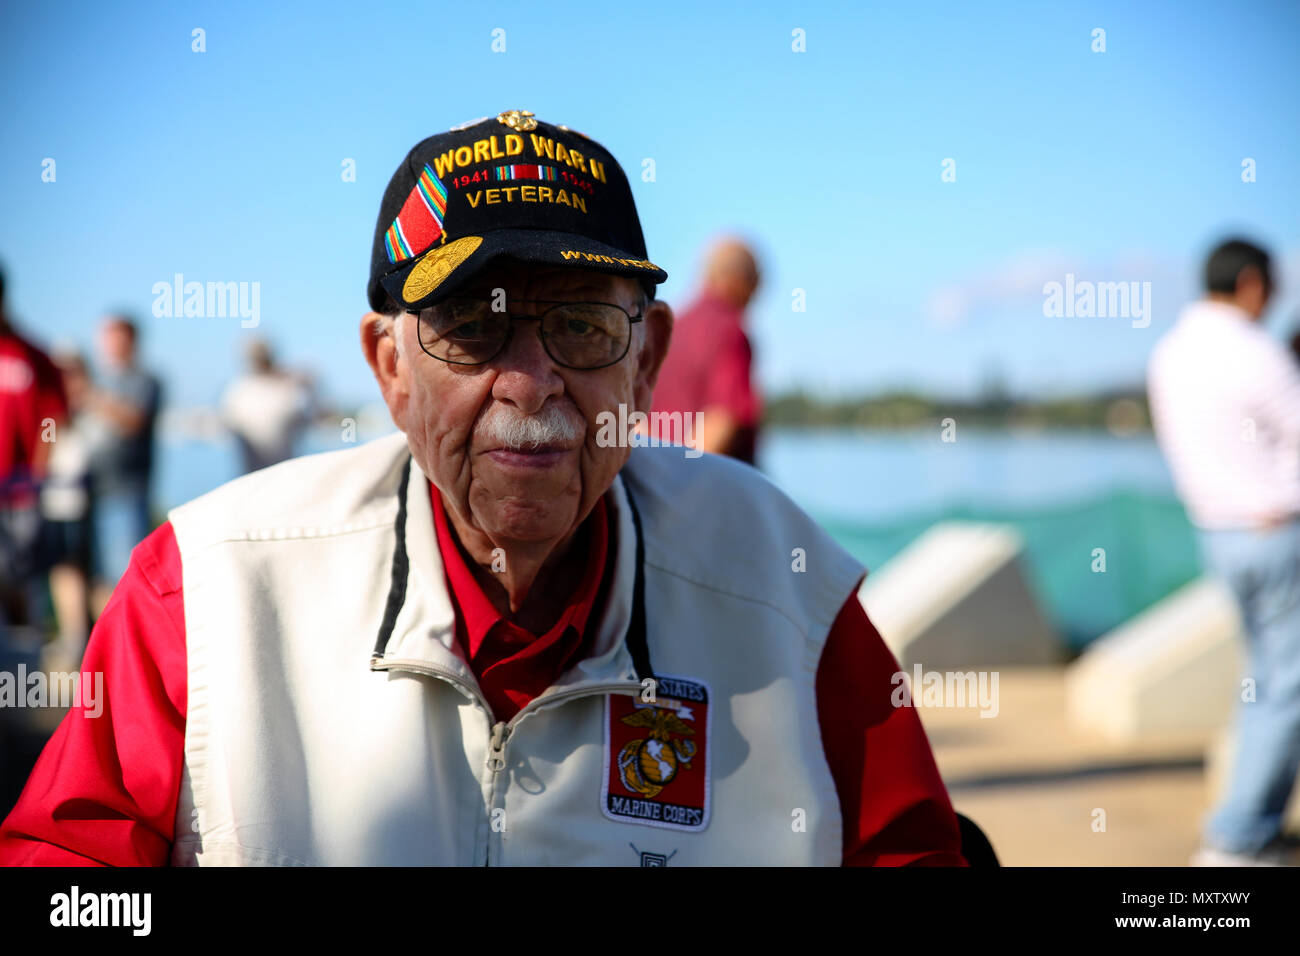 Former U.S. Marine Cpl. Arthur Smith visits the Waterfront Memorial during the Freedom Bell Opening Ceremony and Bell Ringing at USS Bowfin Submarine Museum & Park on Pearl Harbor, Hawaii, Dec. 6, 2016. Smith participated in the invasion of Guam with the 1st Provisional Marine Brigade. Civilians, veterans, and service members came together to remember and pay their respects to those who fought and lost their lives during the attack on Pearl Harbor. (U.S. Marine Corps photo by Lance Cpl. Robert Sweet) Stock Photo